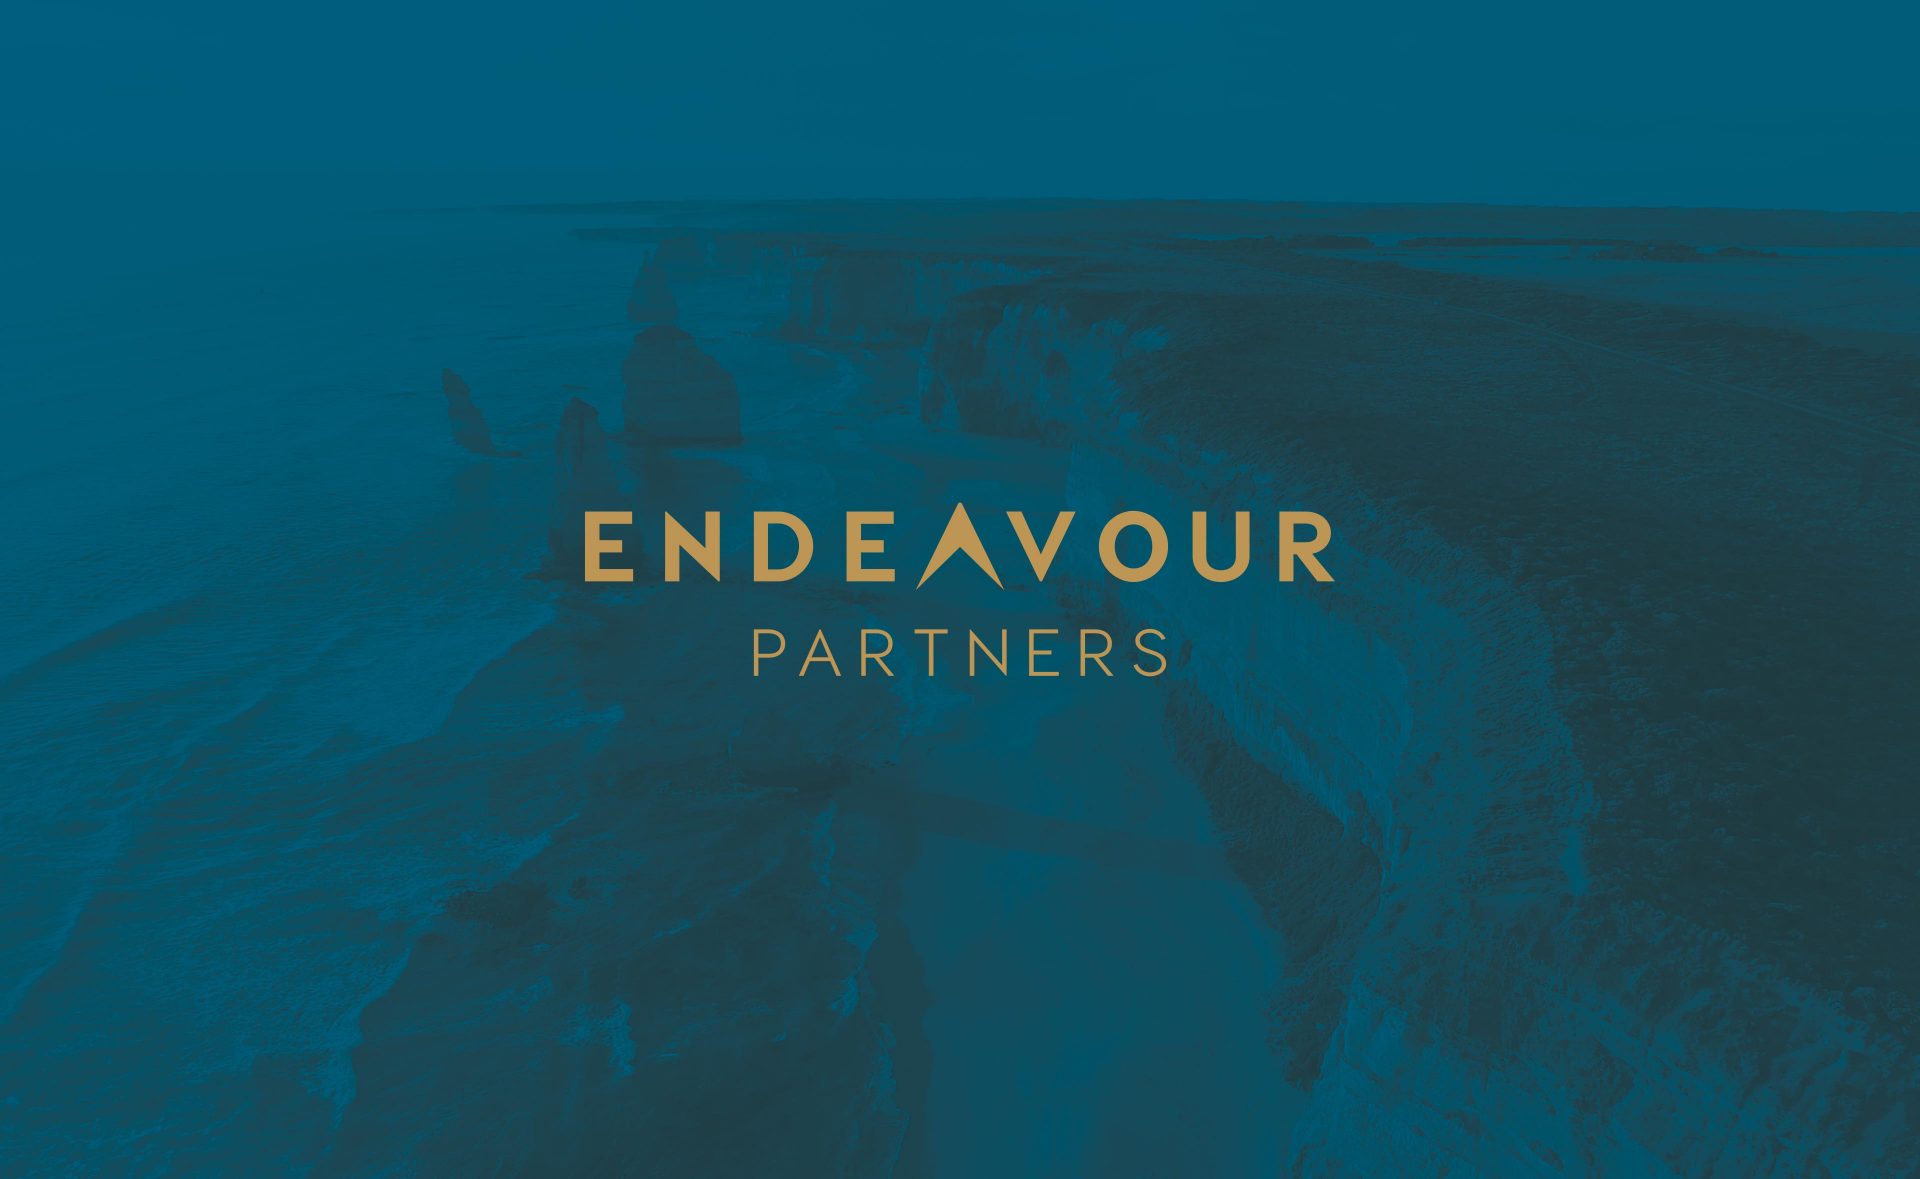 Endeavour Partners Design and Branding Case Study